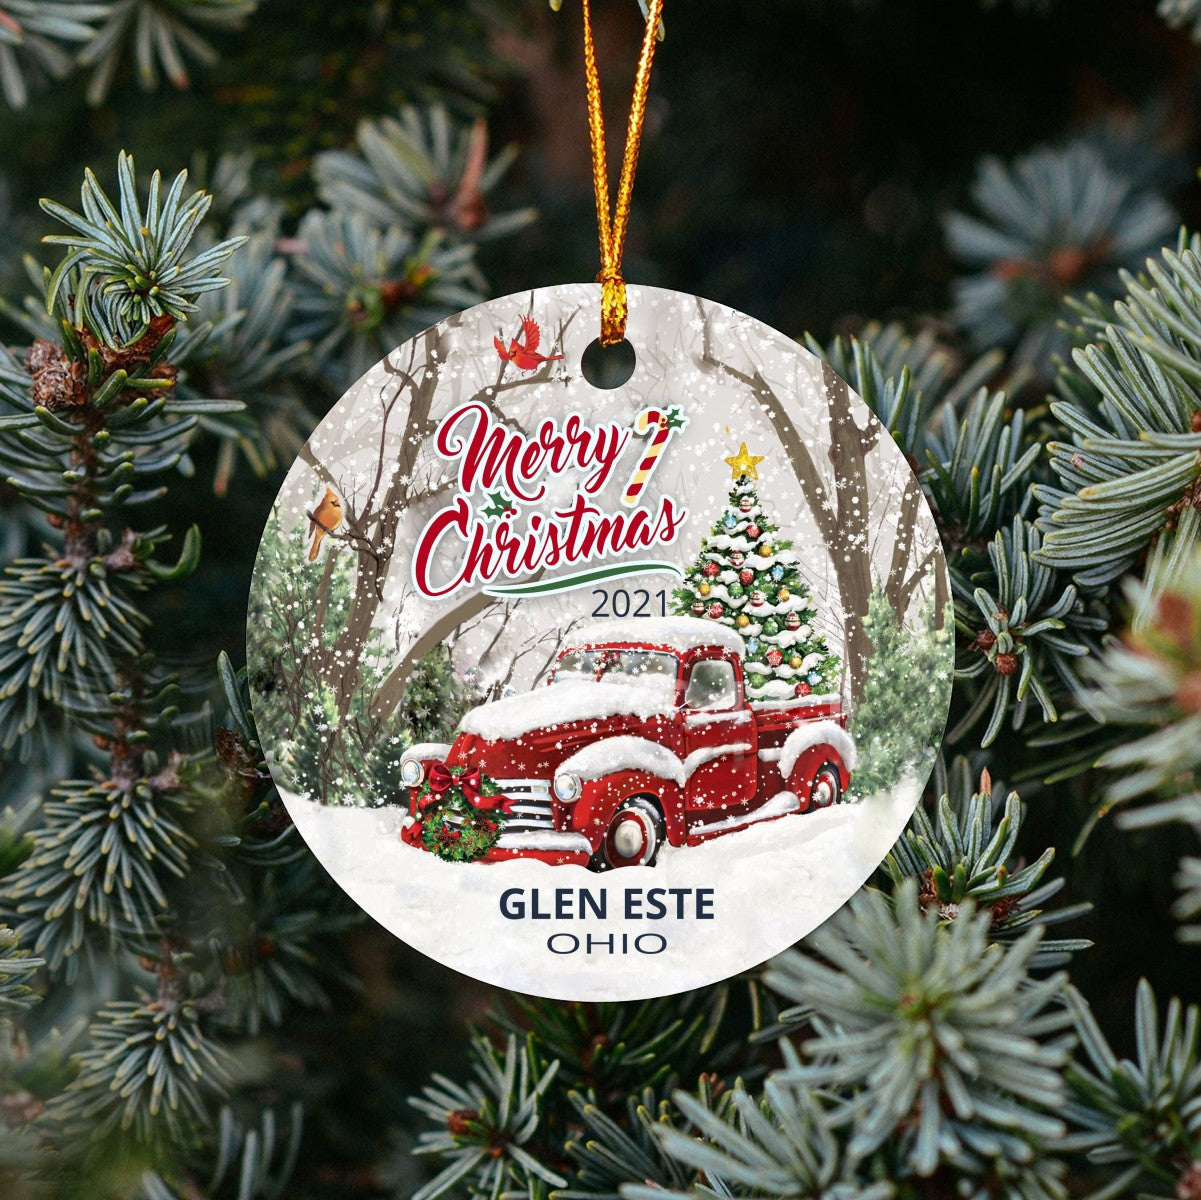 Christmas Tree Ornaments Glen Este - Ornament With Name City, State Glen Este Ohio OH Ornament - Red Truck Xmas Ornaments 3'' Plastic Gift For Family, Friend And Housewarming